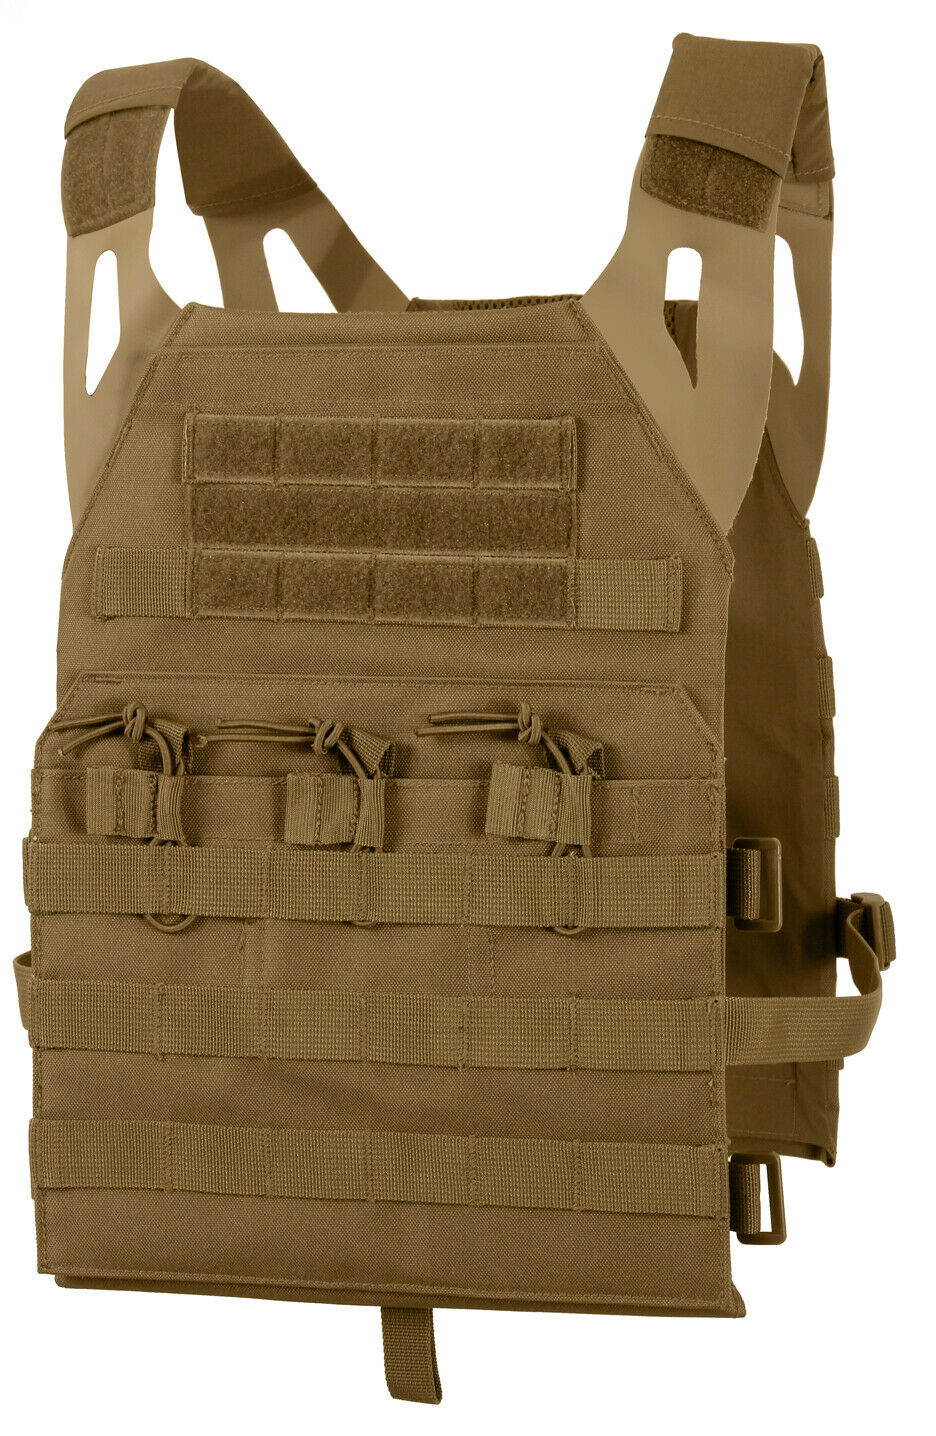 Rothco Lightweight Armor Plate Carrier Vest Oversized 2XL 3XL - Coyote Brown